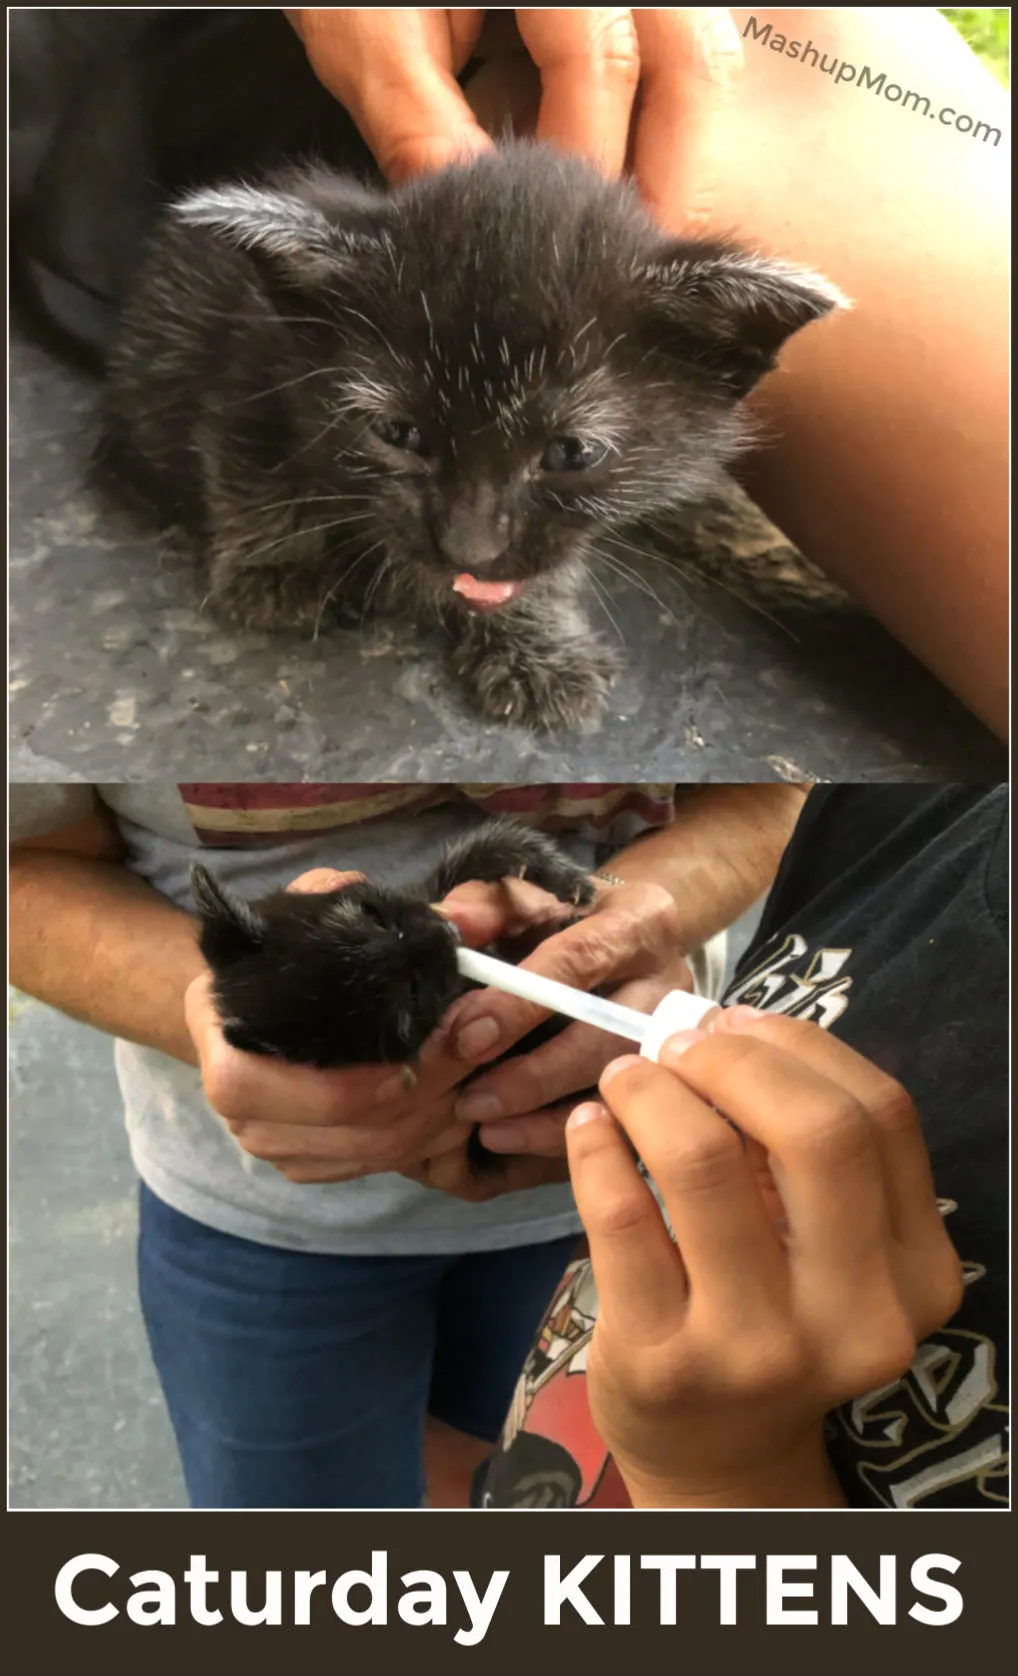 Caturday kittens -- black kitten with white eyebrows and feeding with a dropper